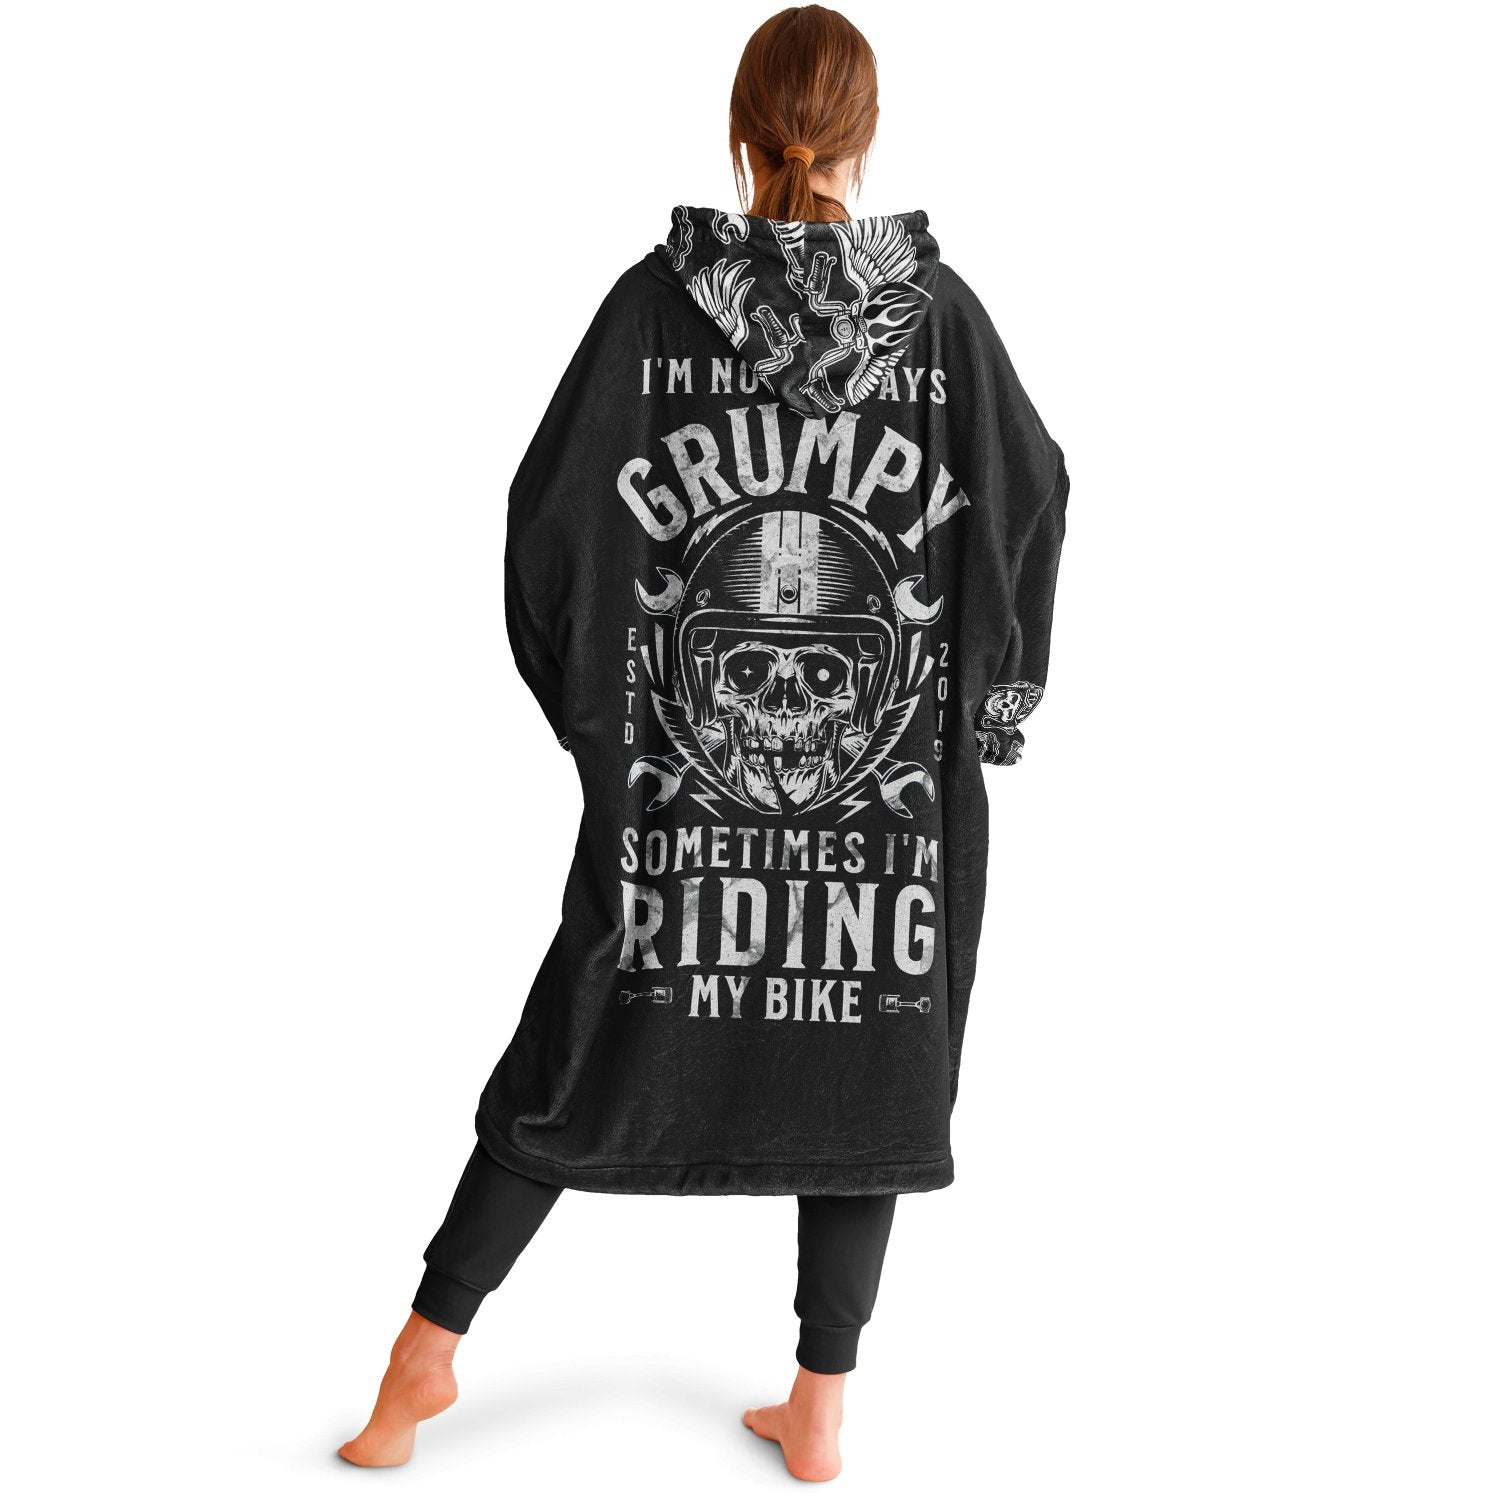 Grumpy Biker Super Hoodie - Available for a Strictly Limited Time ⏰ - chaosandthunder